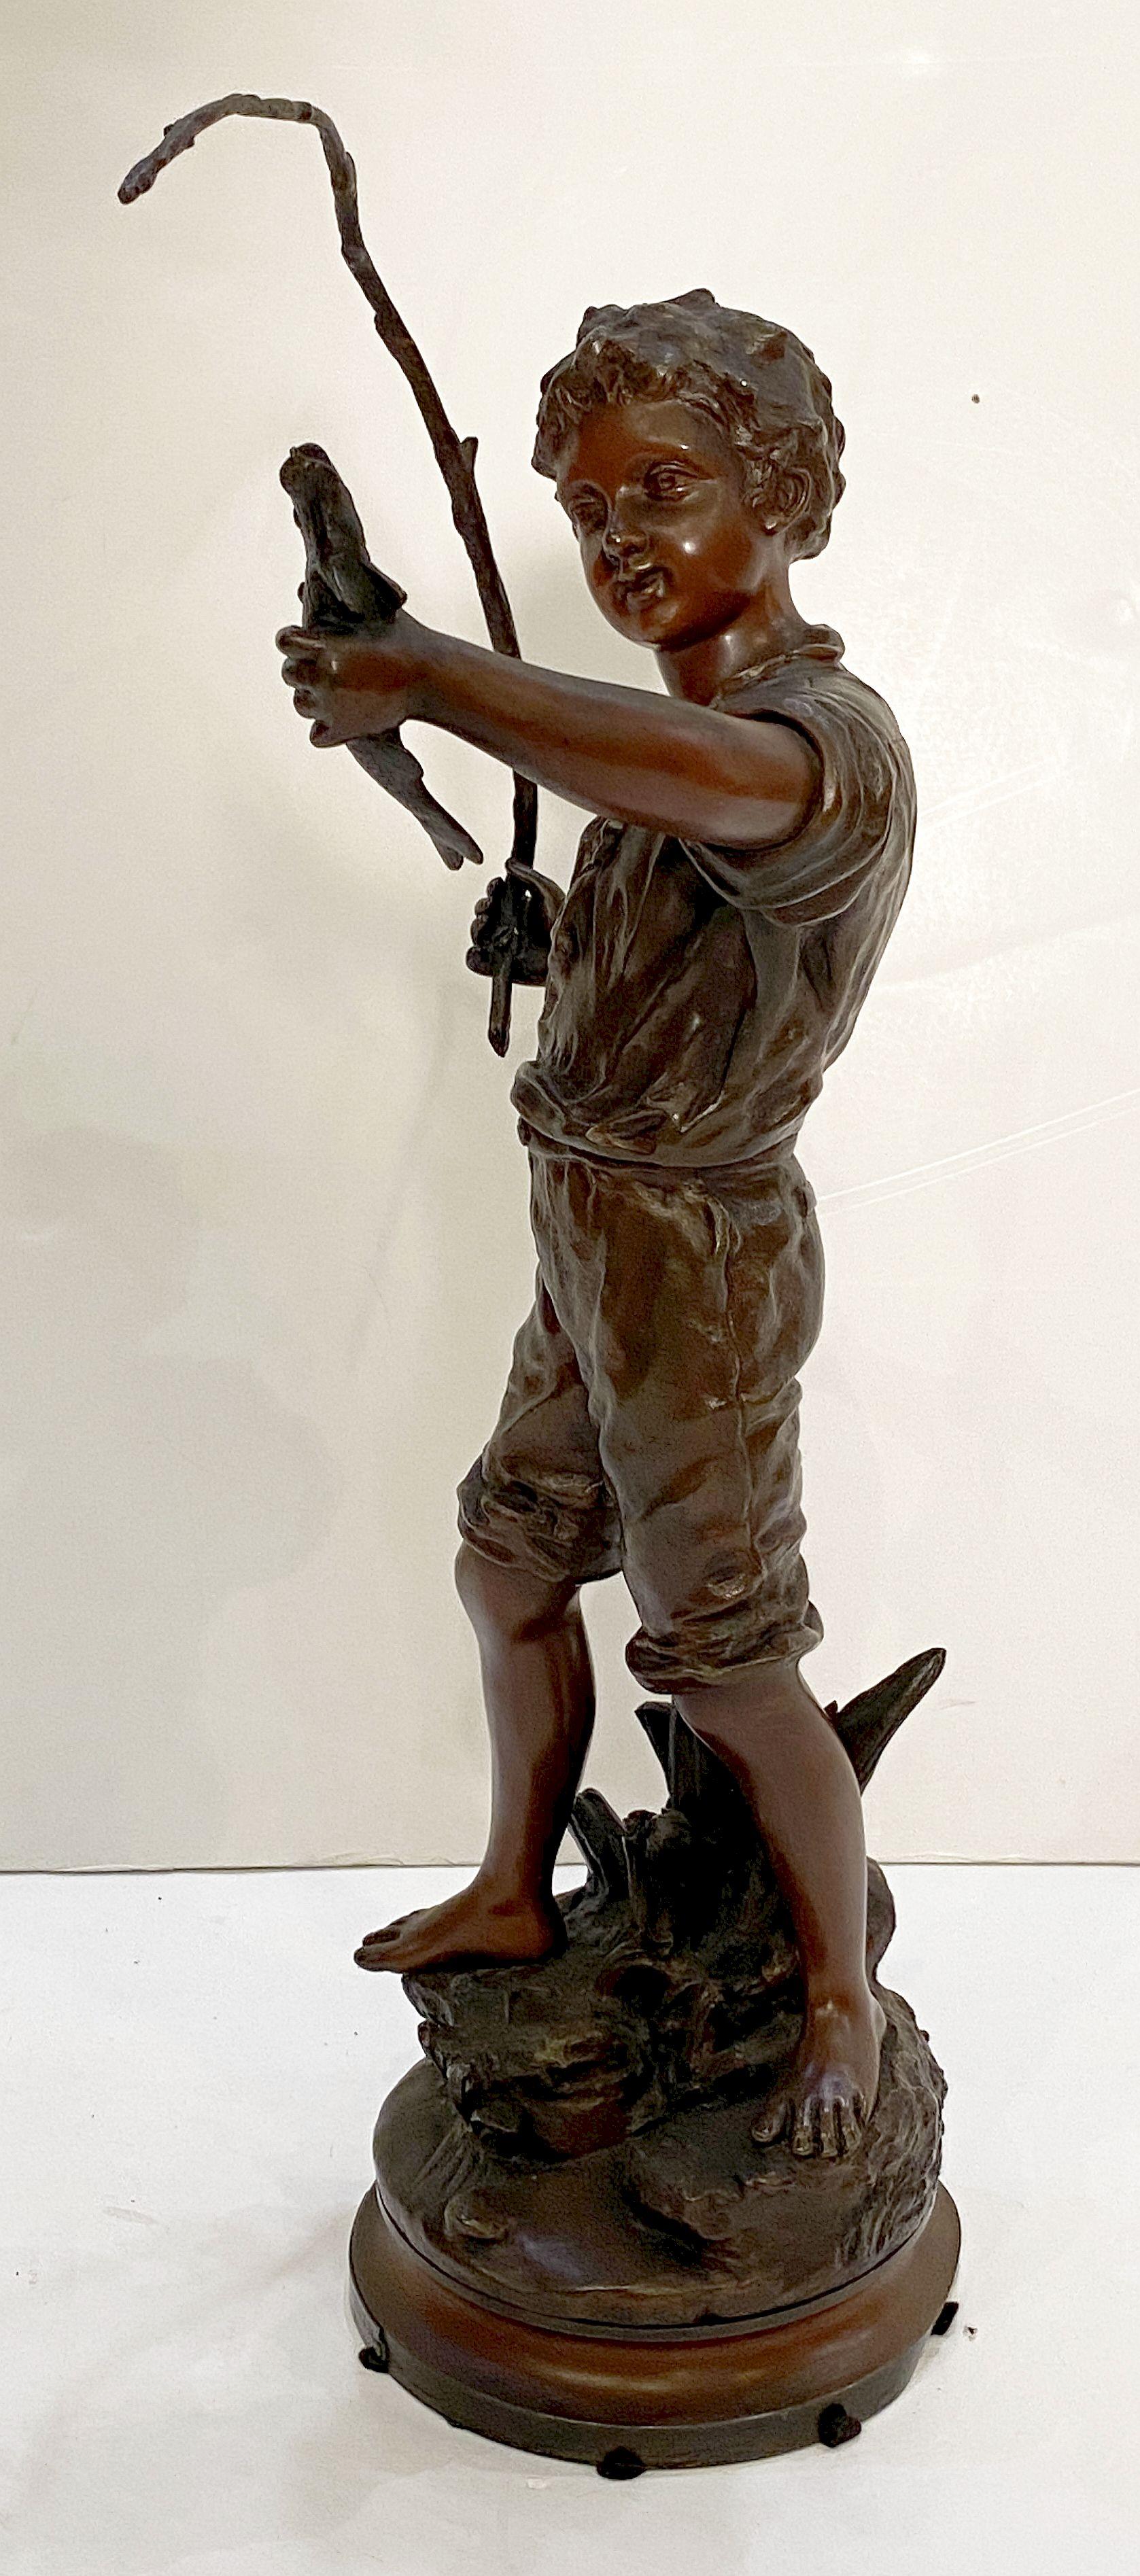 Heureux Pêcheur or Happy Fisherboy Bronze Sculptural Figure by Charles Anfrie  3